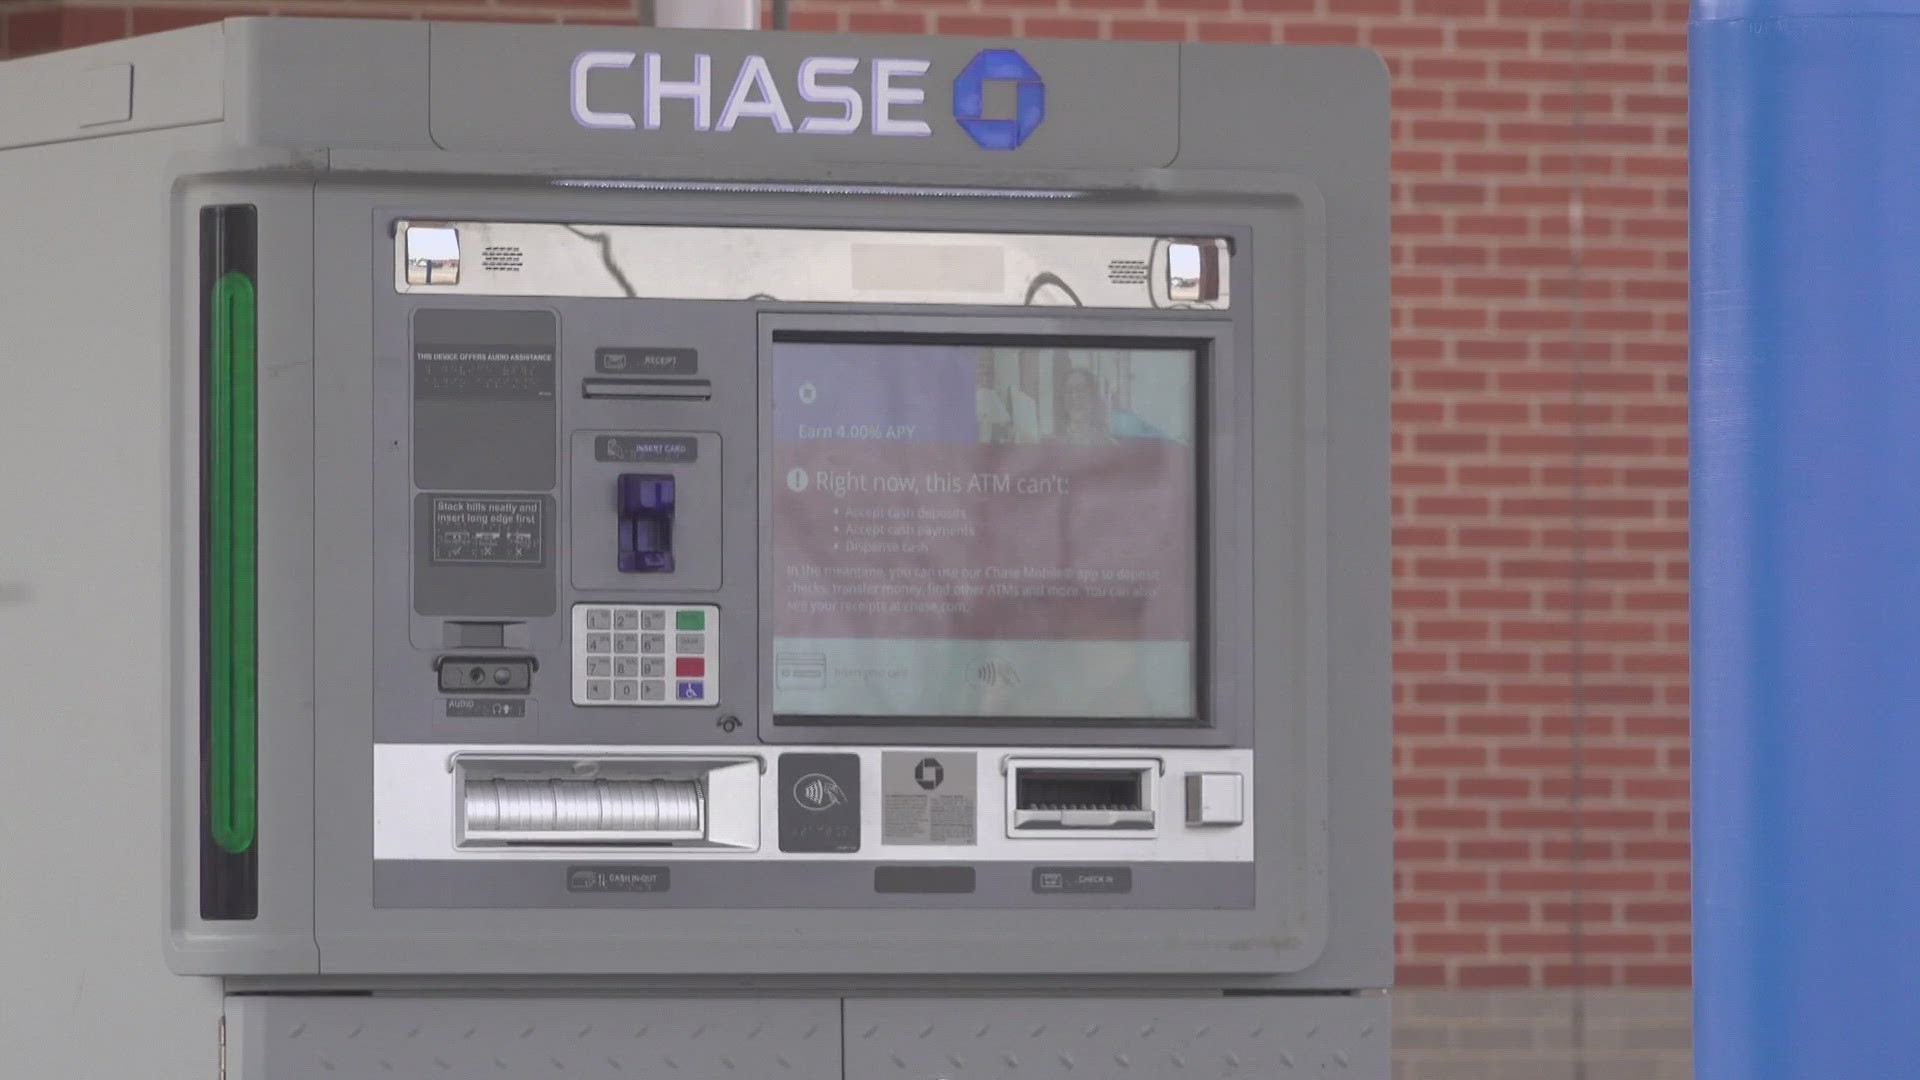 Some banks are moving away from ATMs in favor of different withdrawal methods.